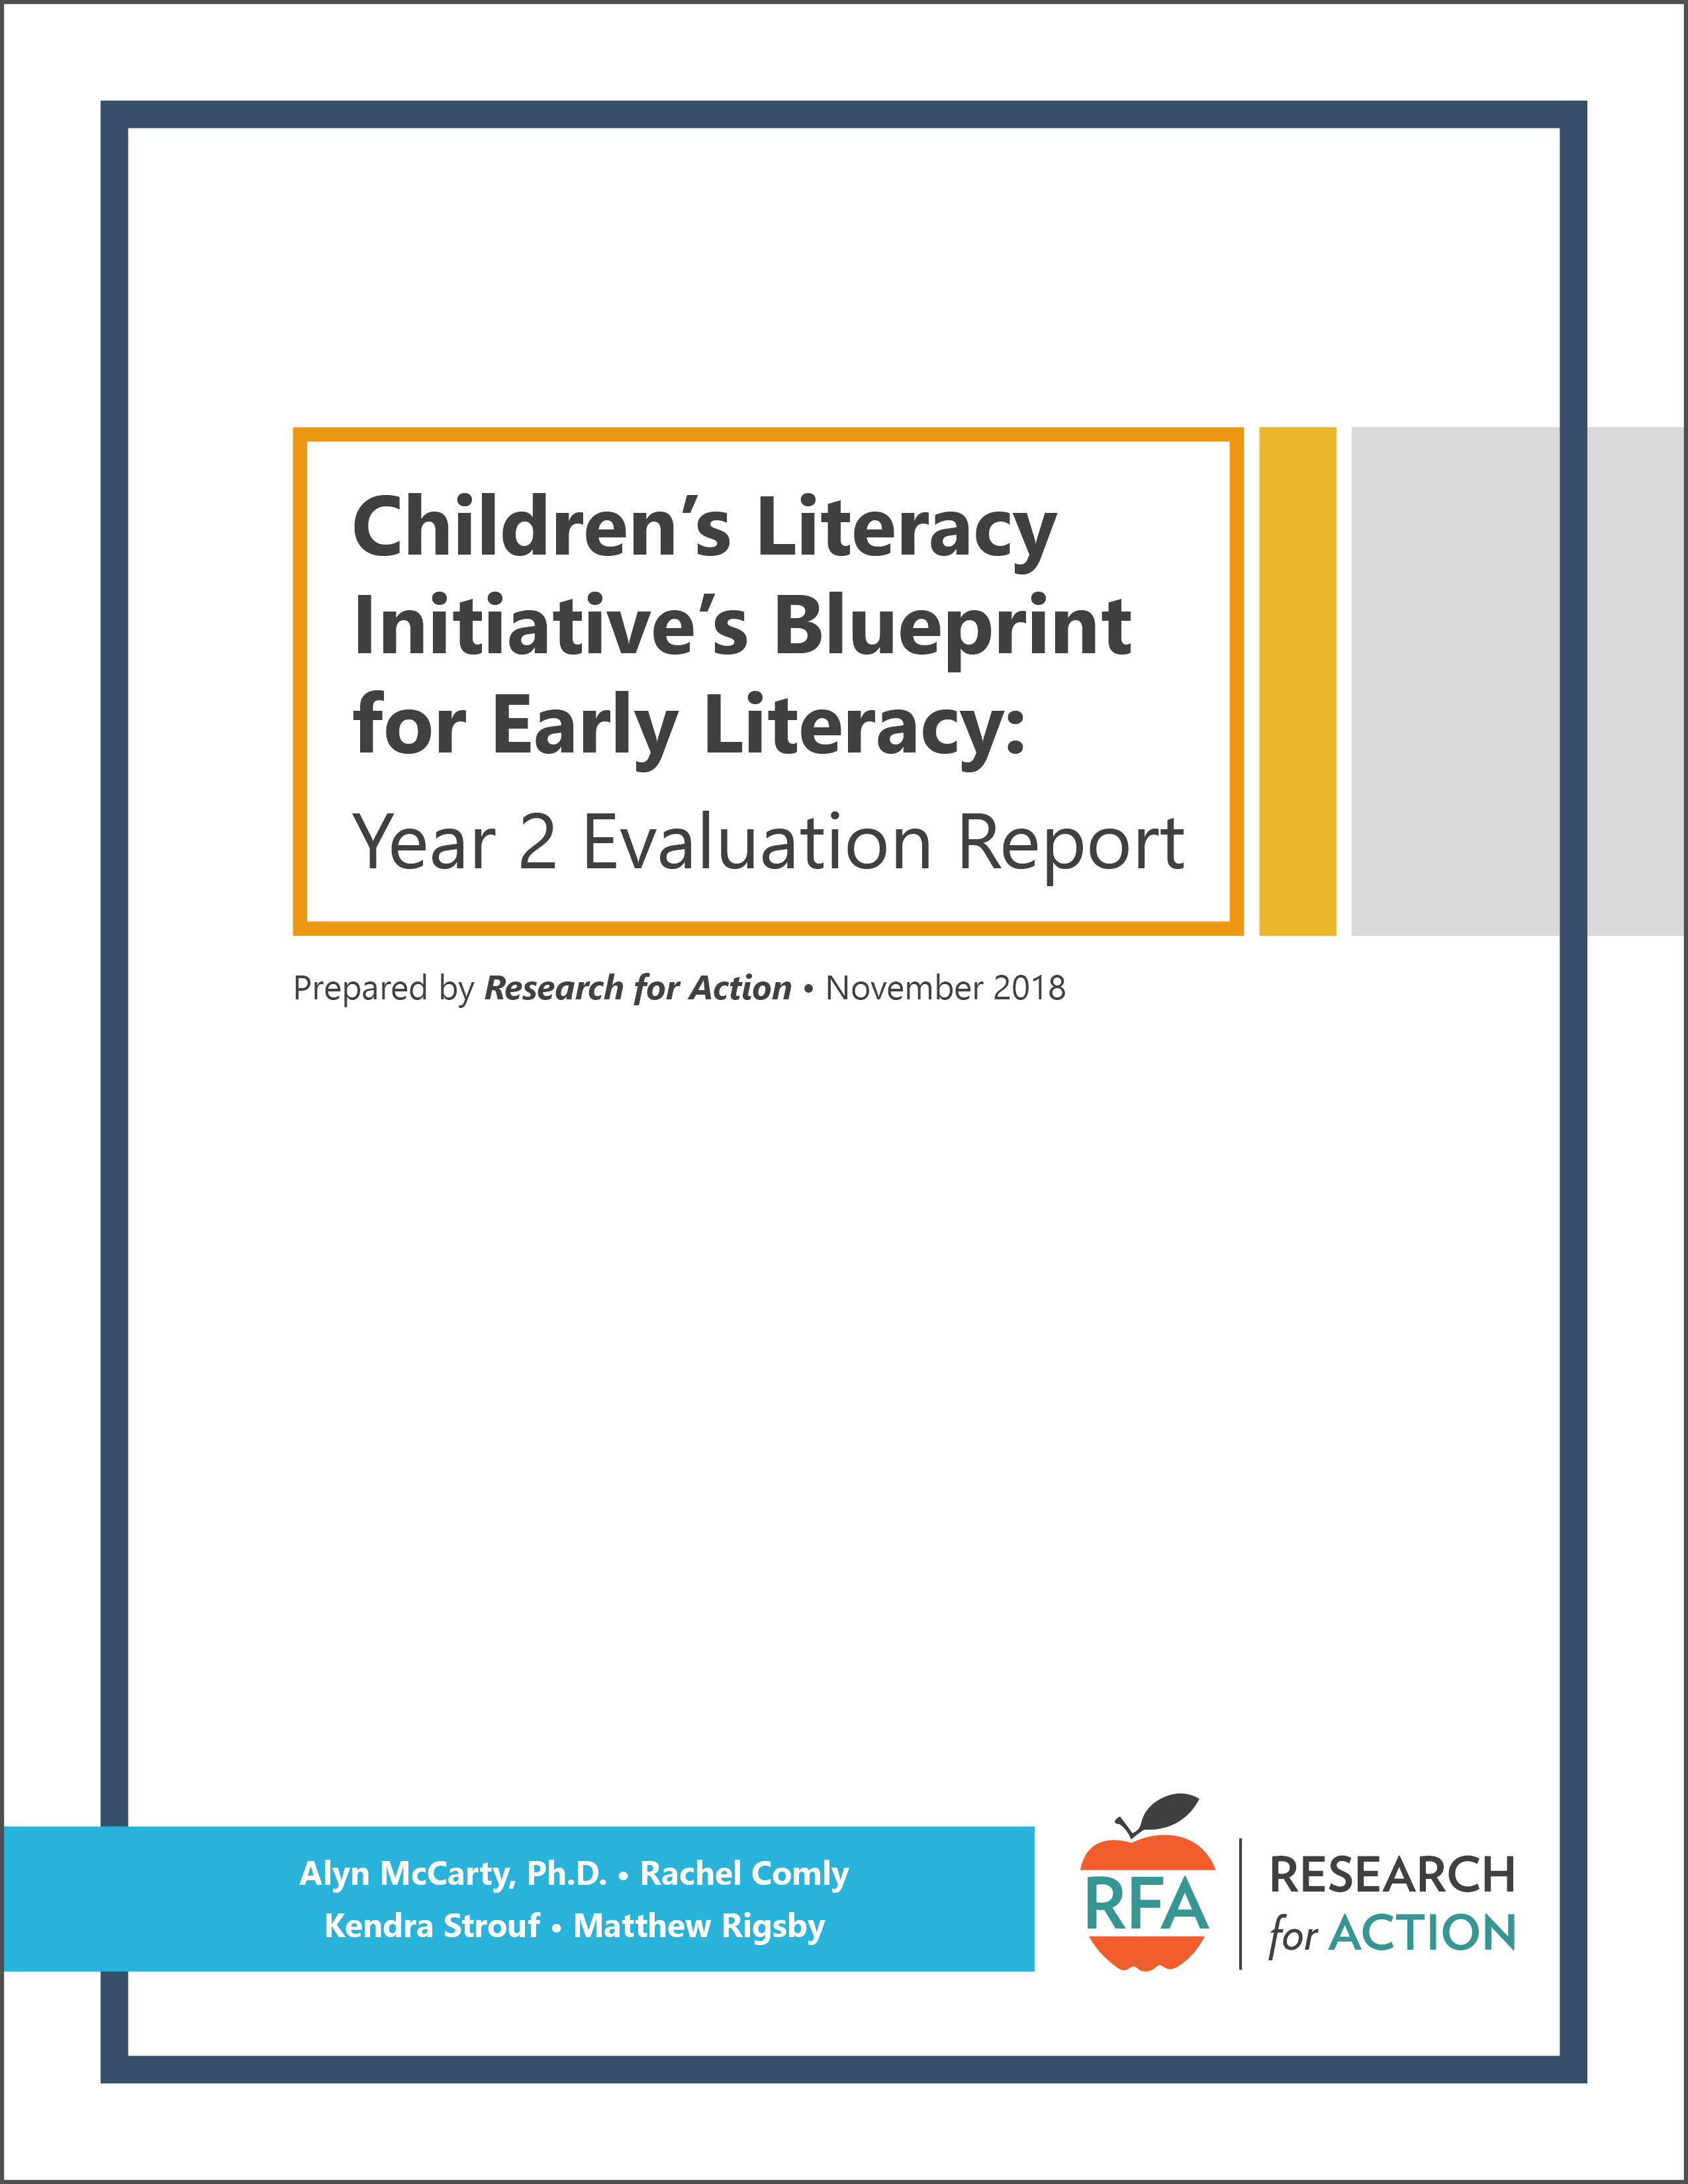 https://cliblueprint.org/wp-content/uploads/2019/02/Childrens-Literacy-Initiatives-Blueprint-for-Early-Literacy-Year-2-Evaluation-Report.pdf